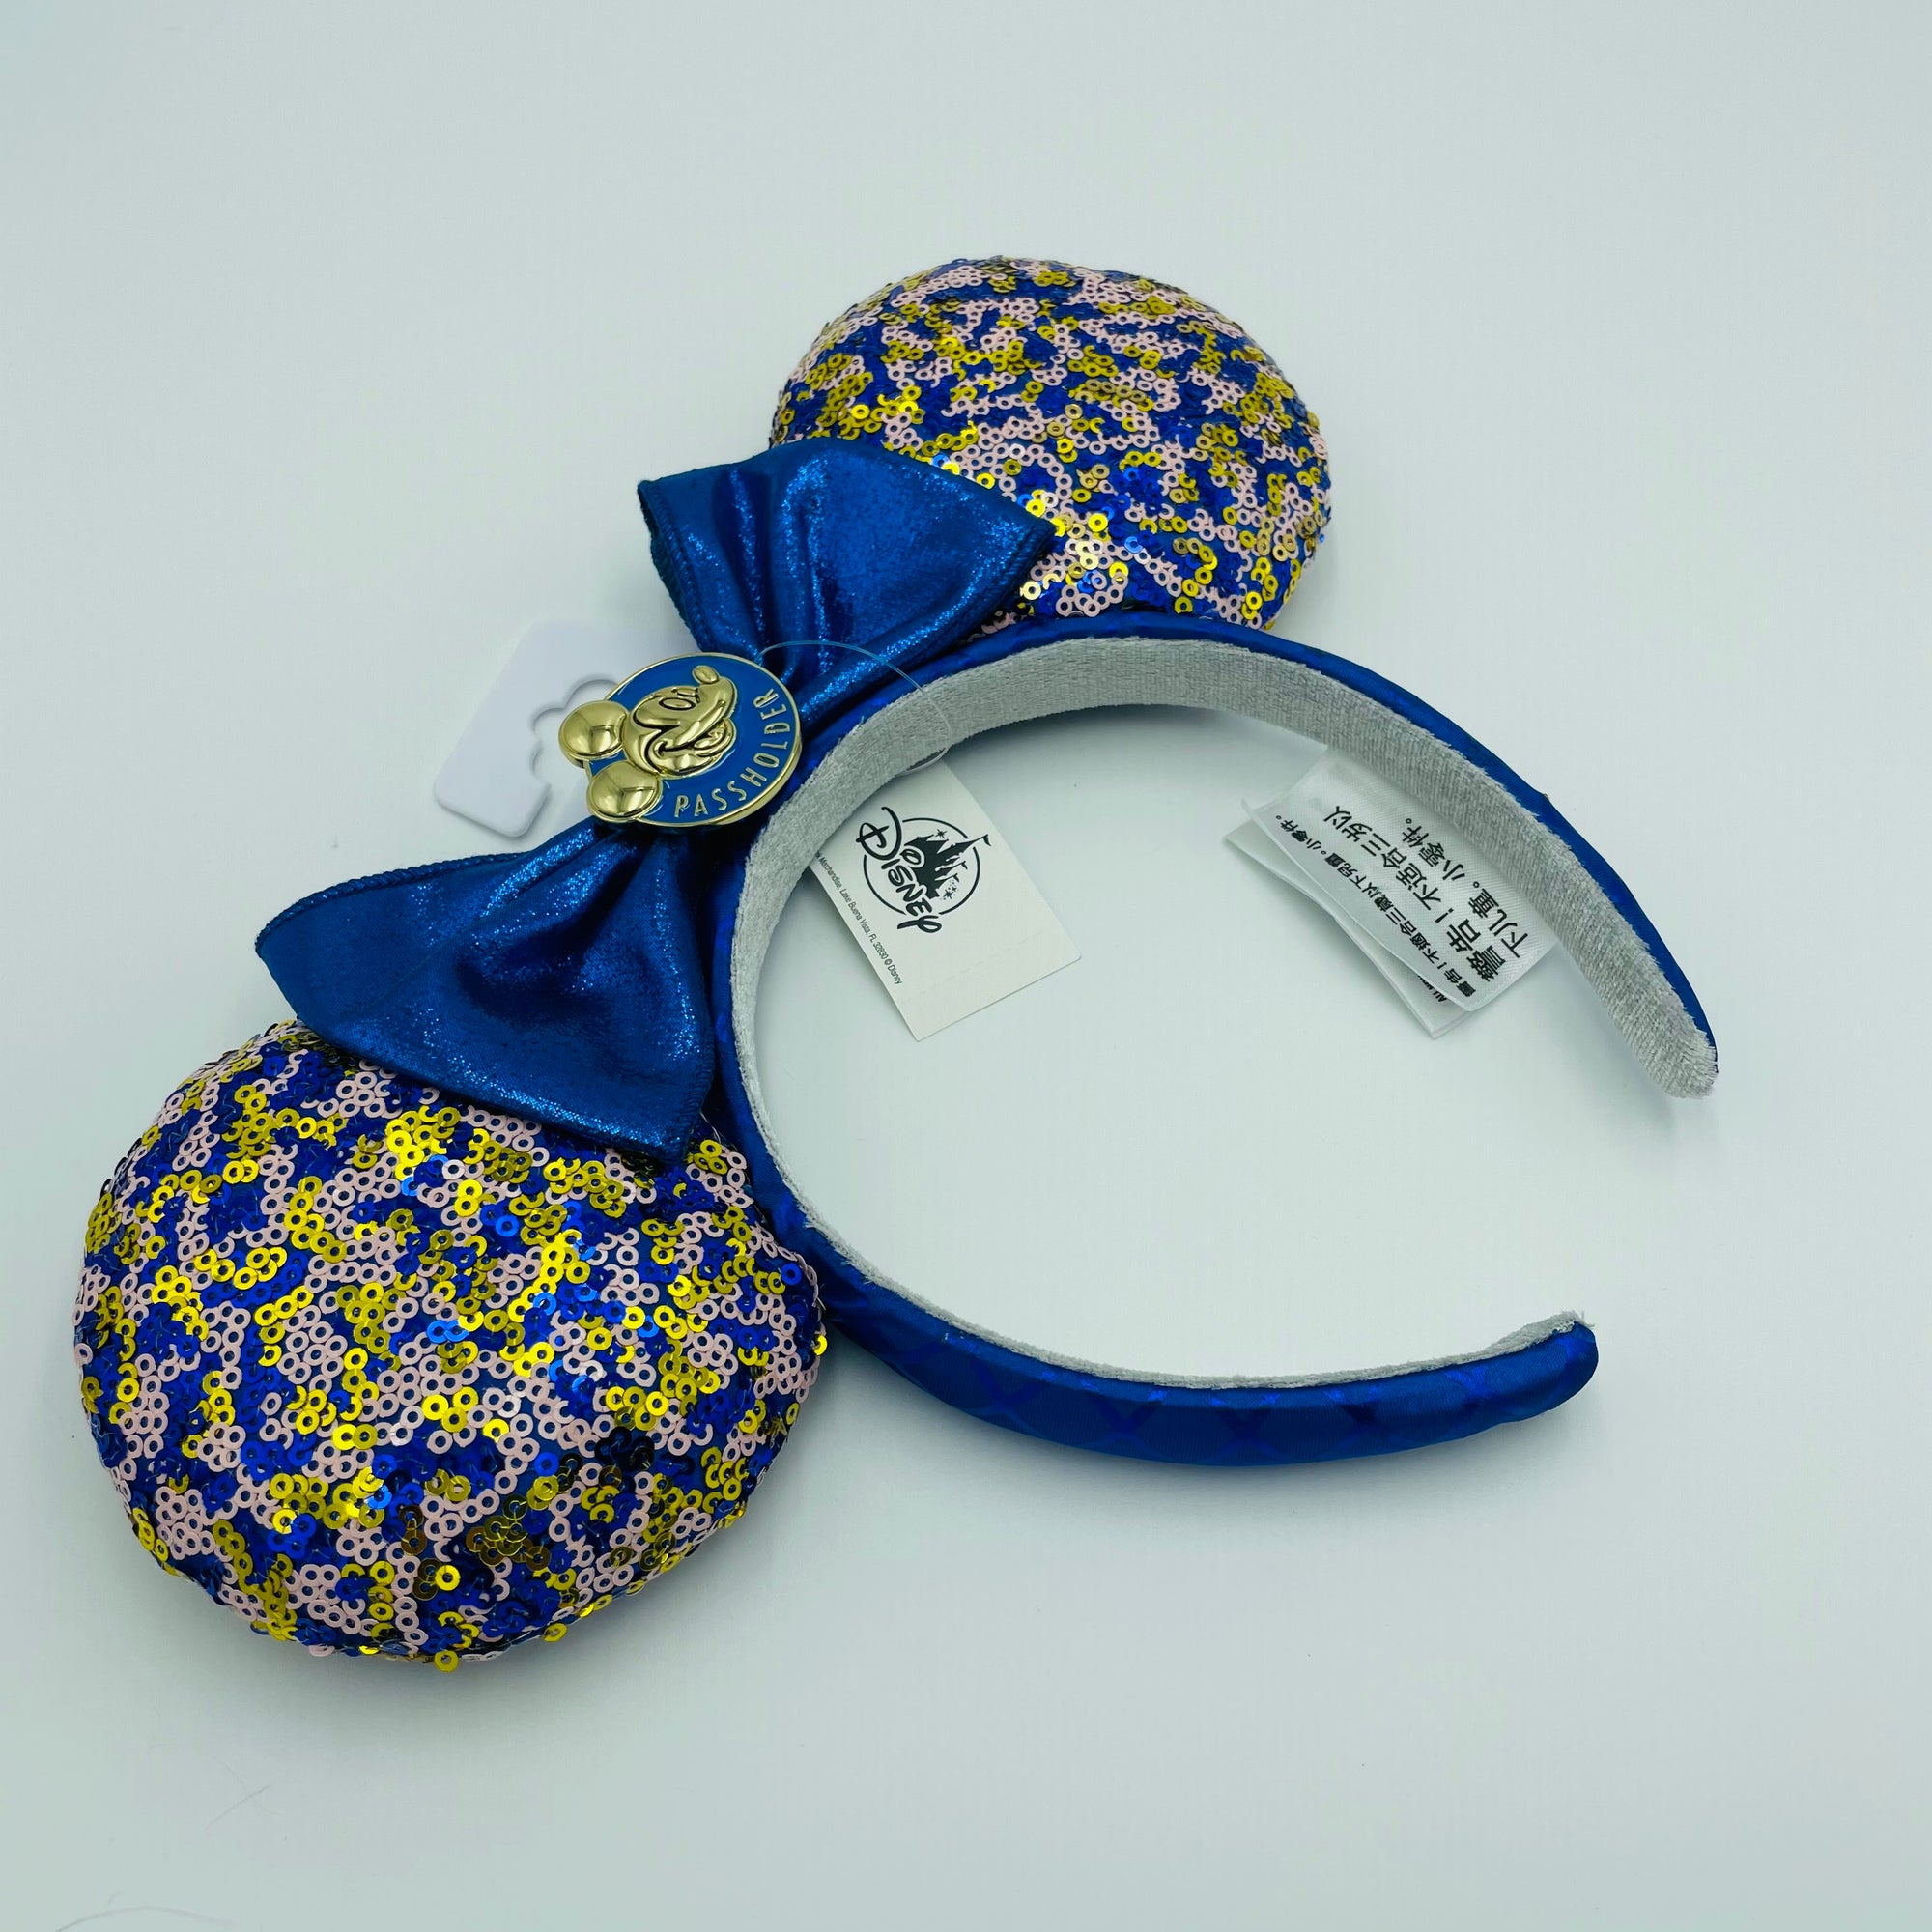 Disney Parks 2021 WDW Annual Passholder Blue Sequined Minnie Mouse Bow Ears